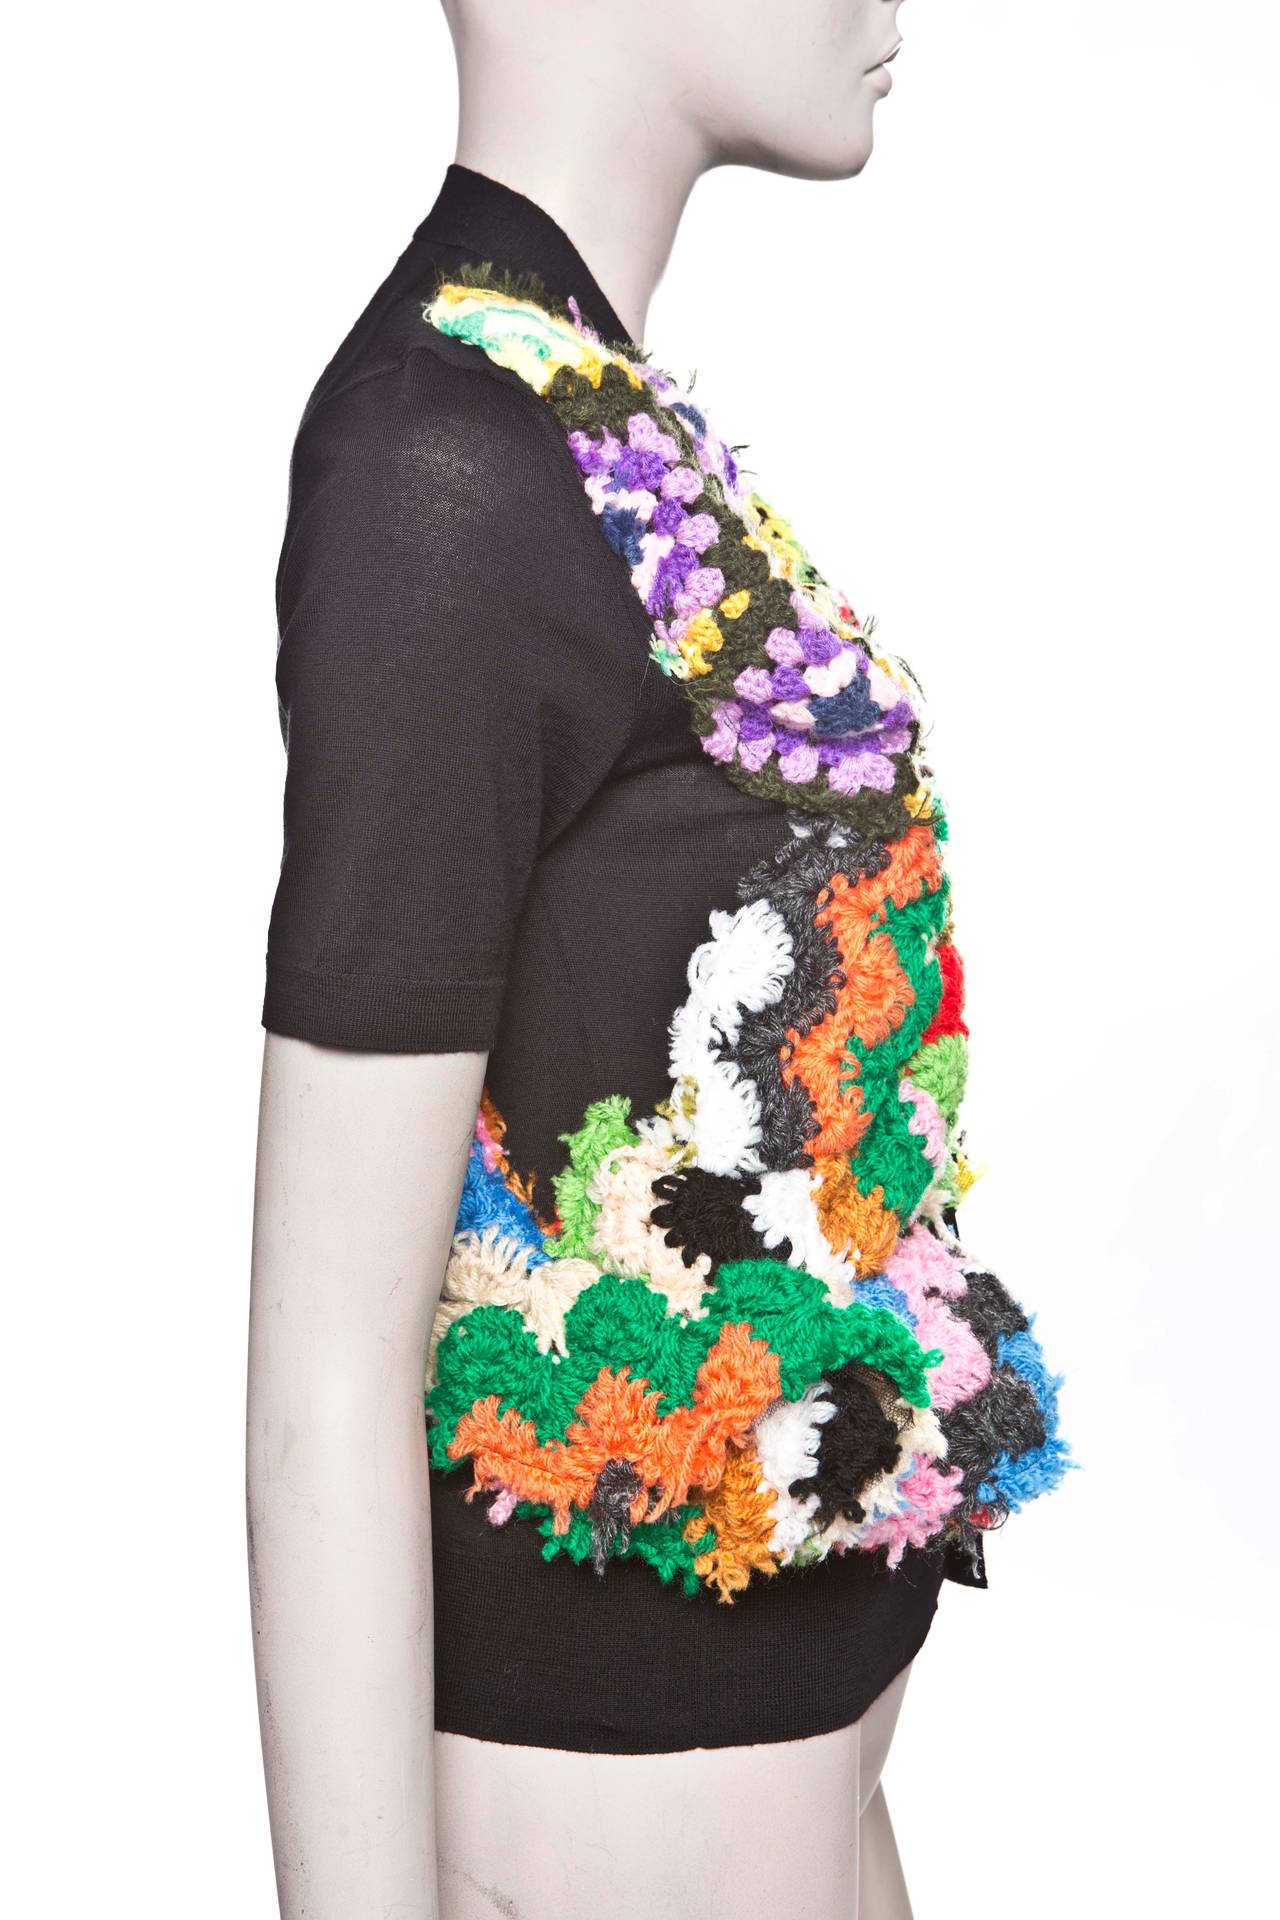 Comme des Garçons, circa 2009 black, wool, short sleeve V-neck sweater with multicolor crochet design and front button closures.

 Bust 30”, Waist 28”, Length 21”